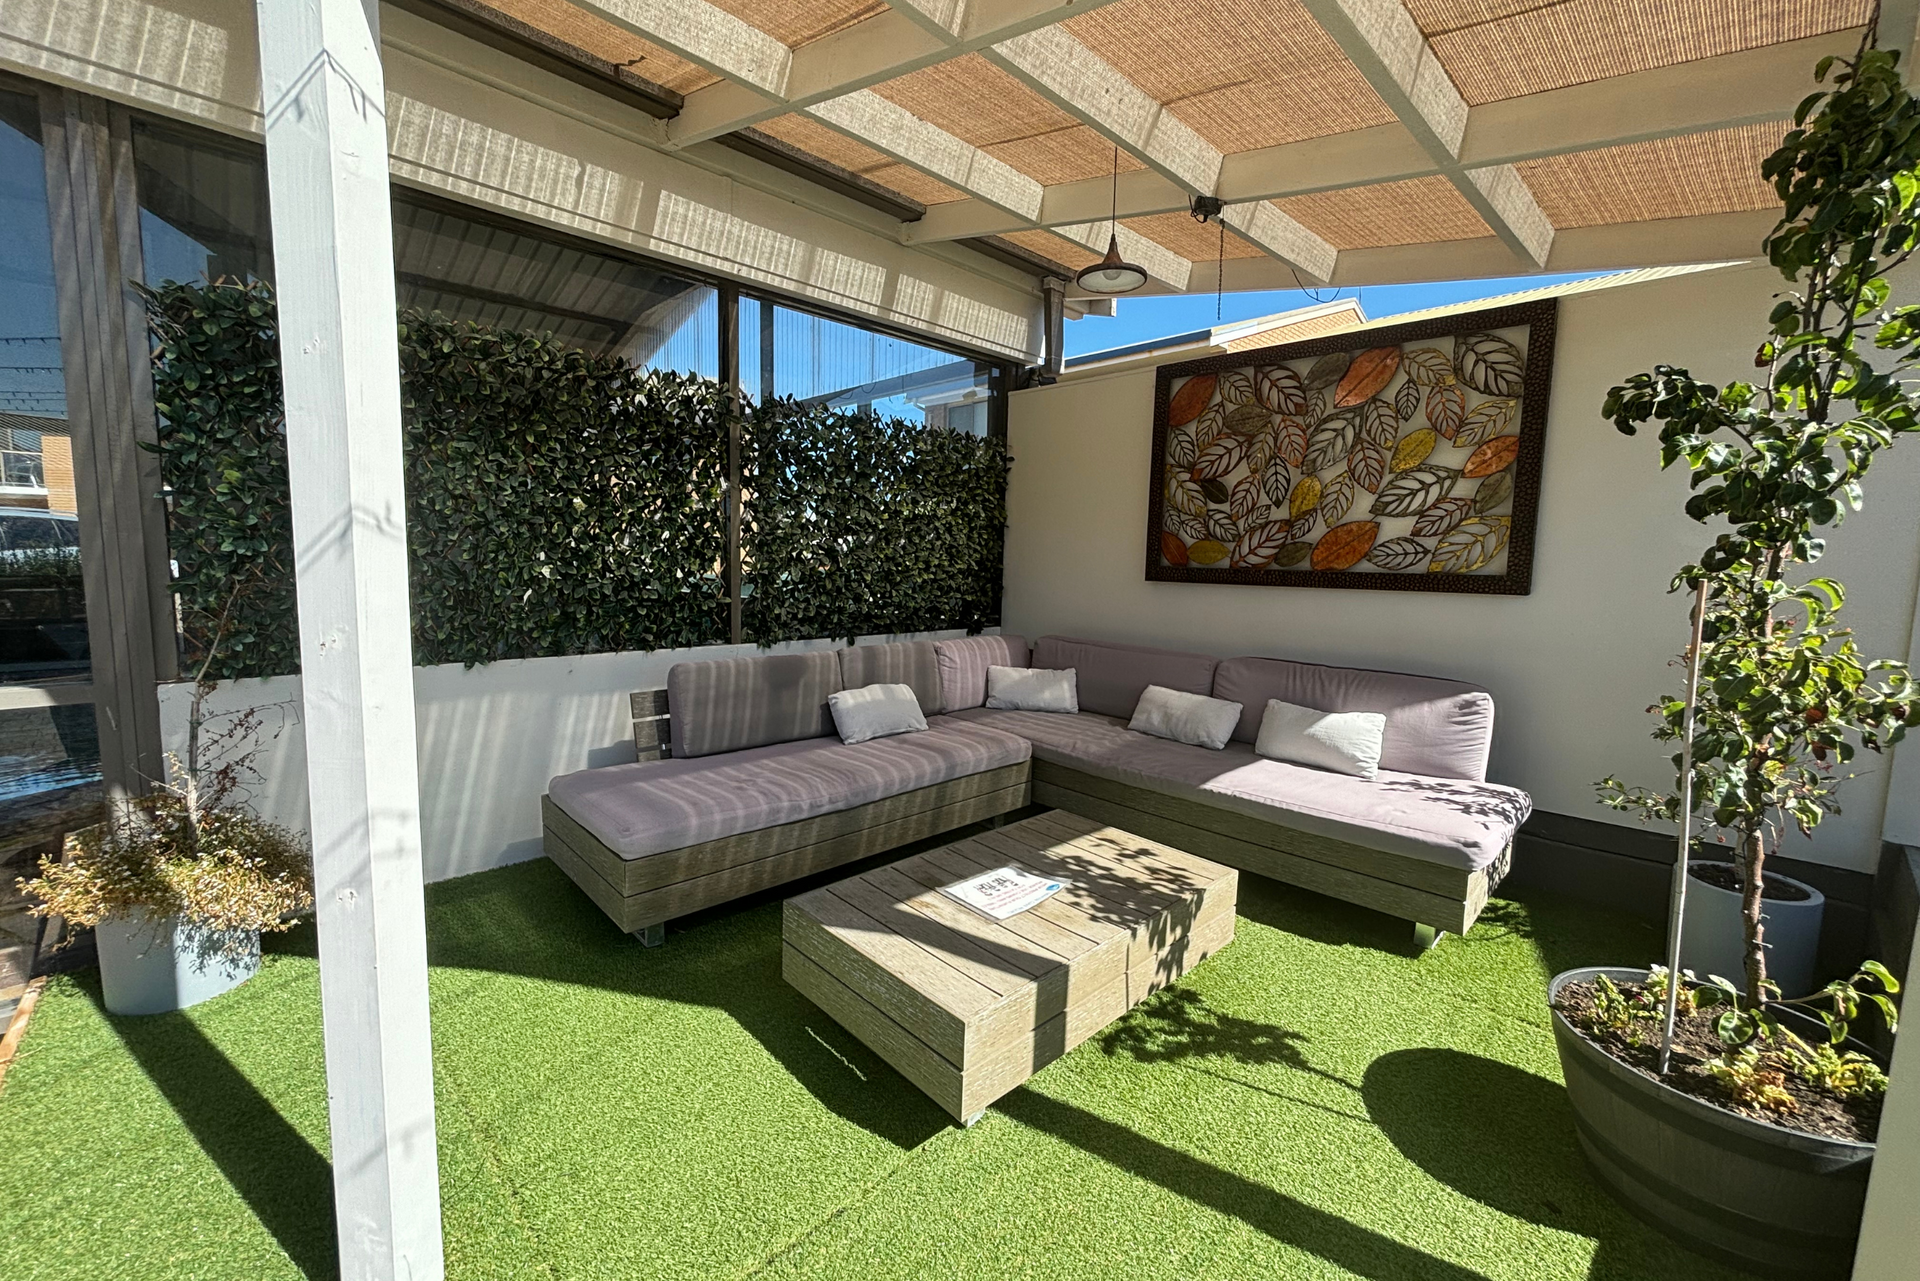 A patio with a couch and a table under a pergola.